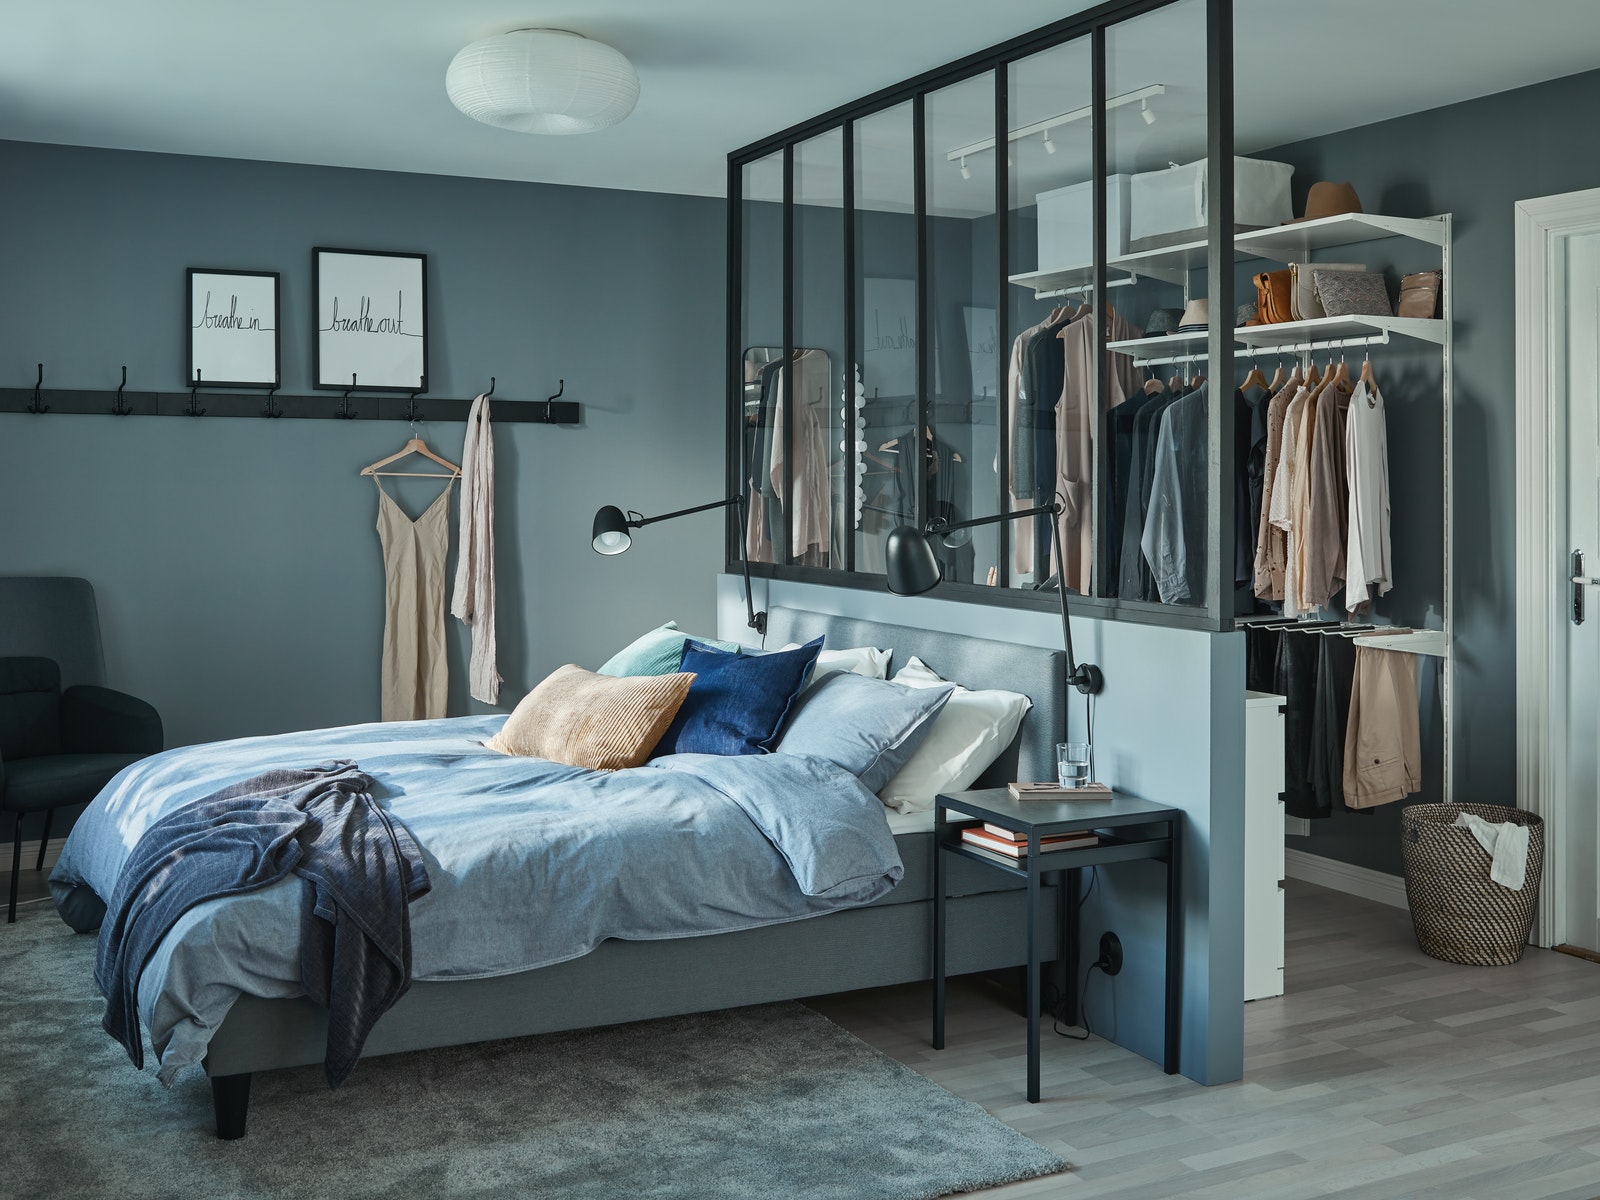 IKEA - A chic and comfy hotel bedroom at home